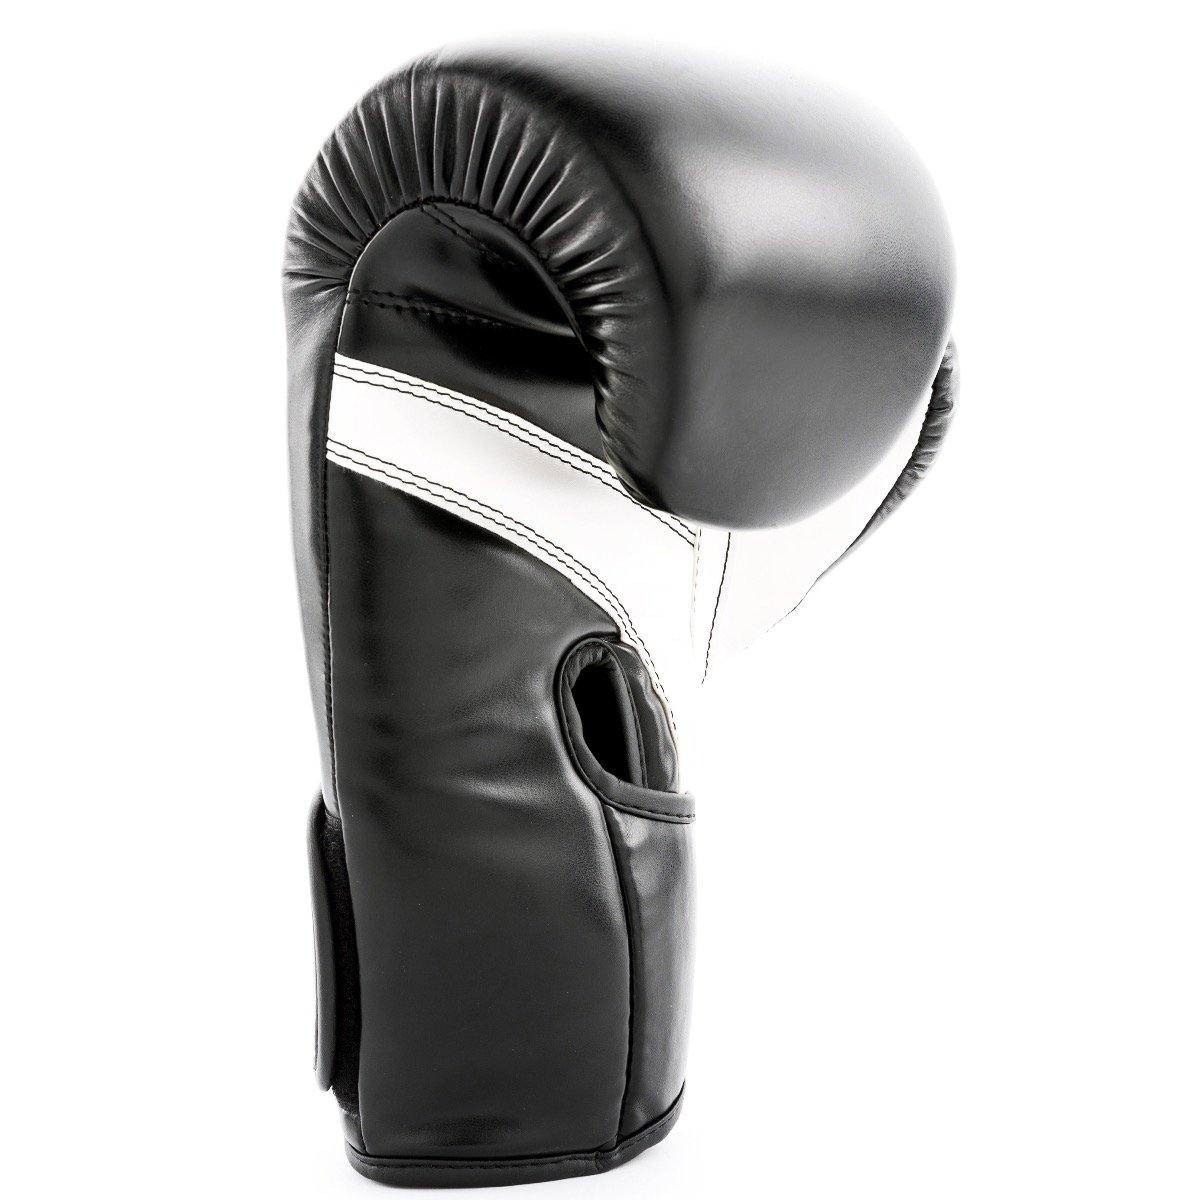 UFC PRO Fitness Training Gloves - UFC Equipment MMA and Boxing Gear Spirit Combat Sports